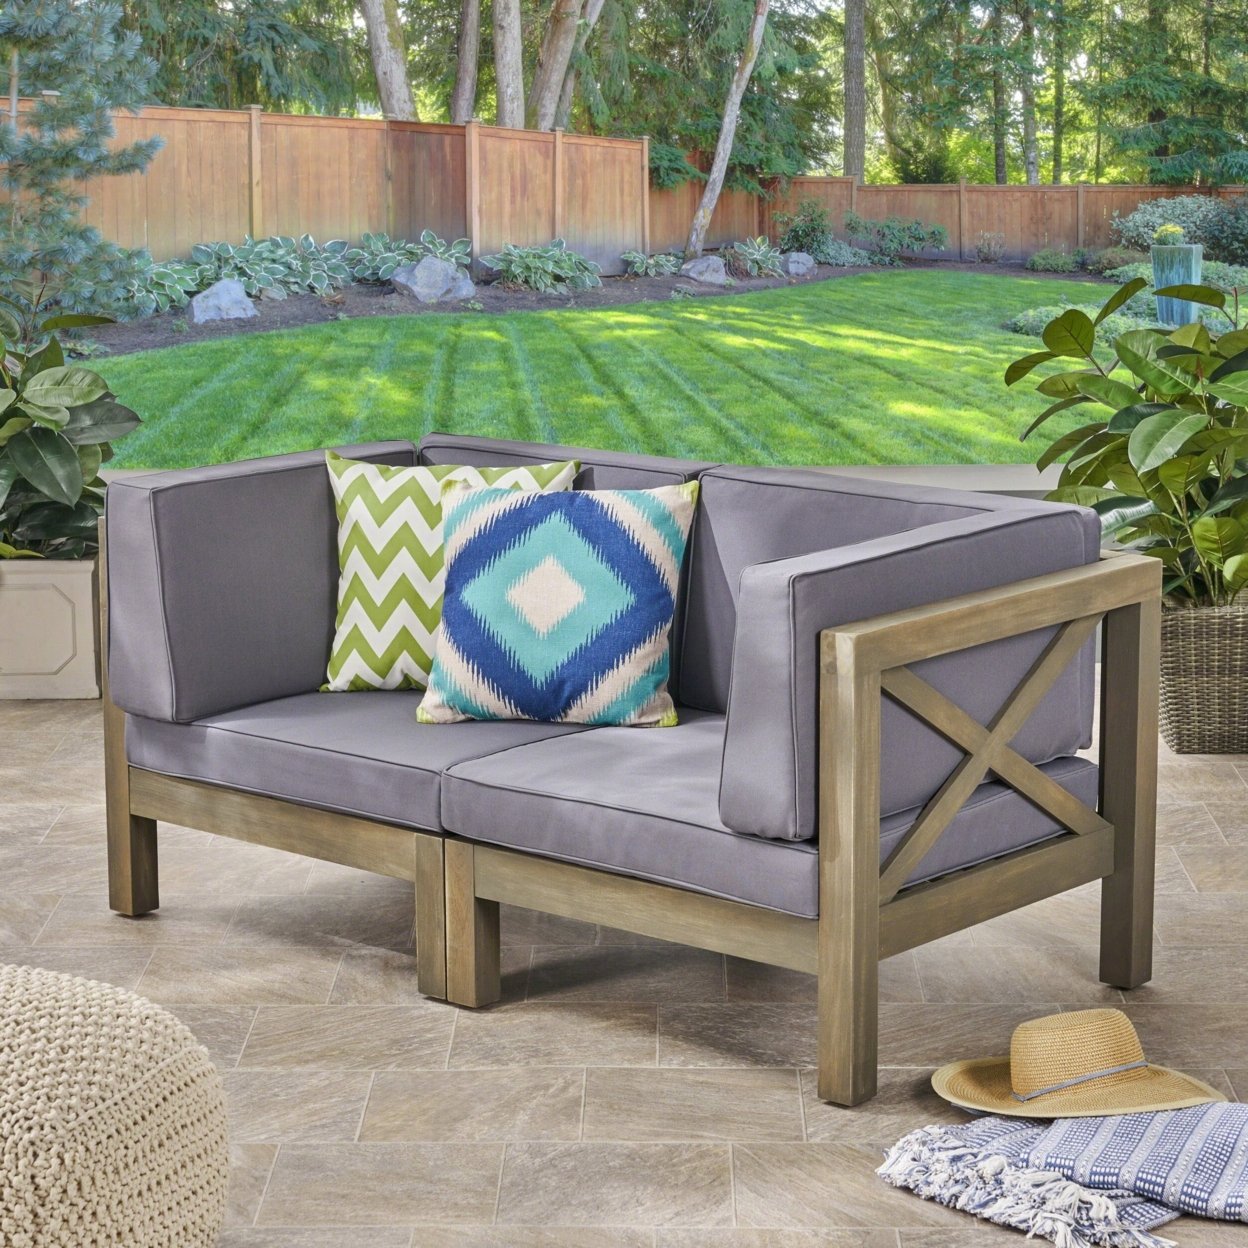 Great Deal Furniture Keith Outdoor Sectional Loveseat Set 2-Seater Acacia Wood Water-Resistant Cushions - Dark Gray